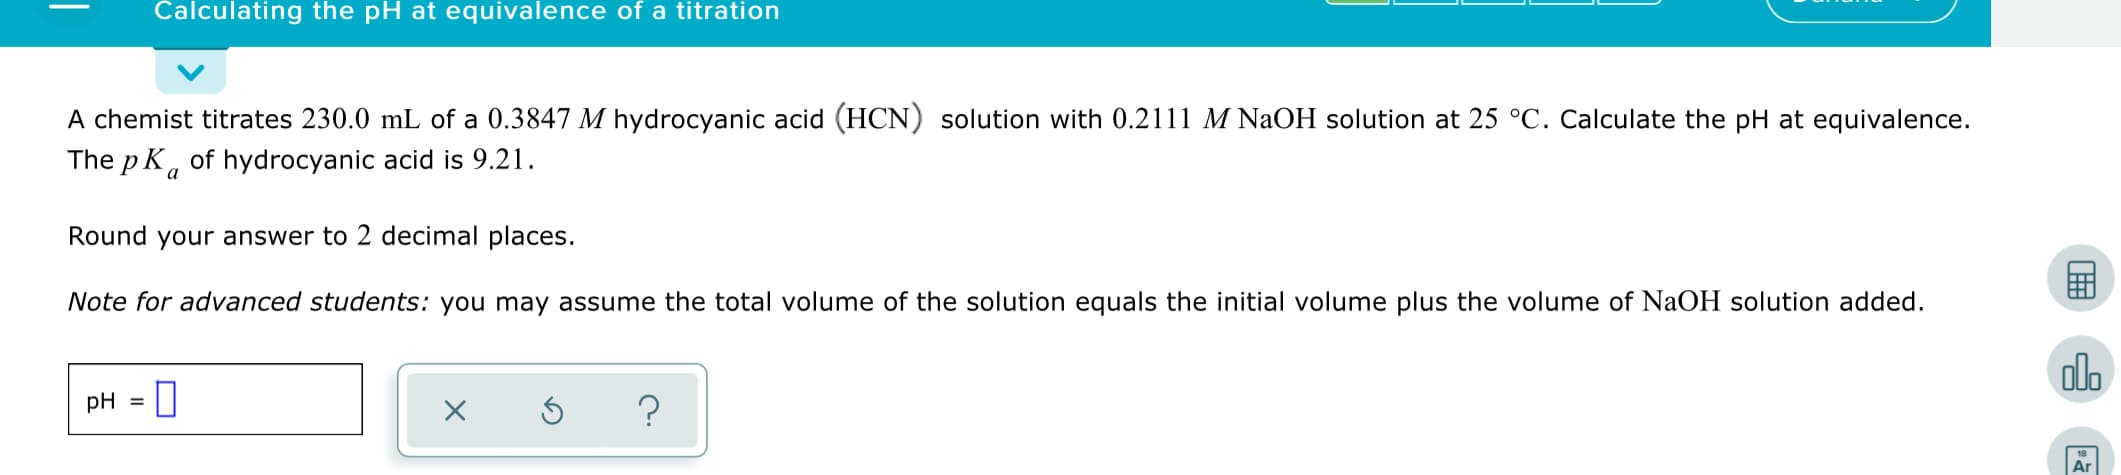 Calculating the pH at equivalence of a titration
A chemist titrates 230.0 mL of a 0.3847 M hydrocyanic acid (HCN) solution with 0.2111 M NAOH solution at 25 °C. Calculate the pH at equivalence.
The p K, of hydrocyanic acid is 9.21.
Round your answer to 2 decimal places.
Note for advanced students: you may assume the total volume of the solution equals the initial volume plus the volume of NaOH solution added.
olo
pH =
Ar
